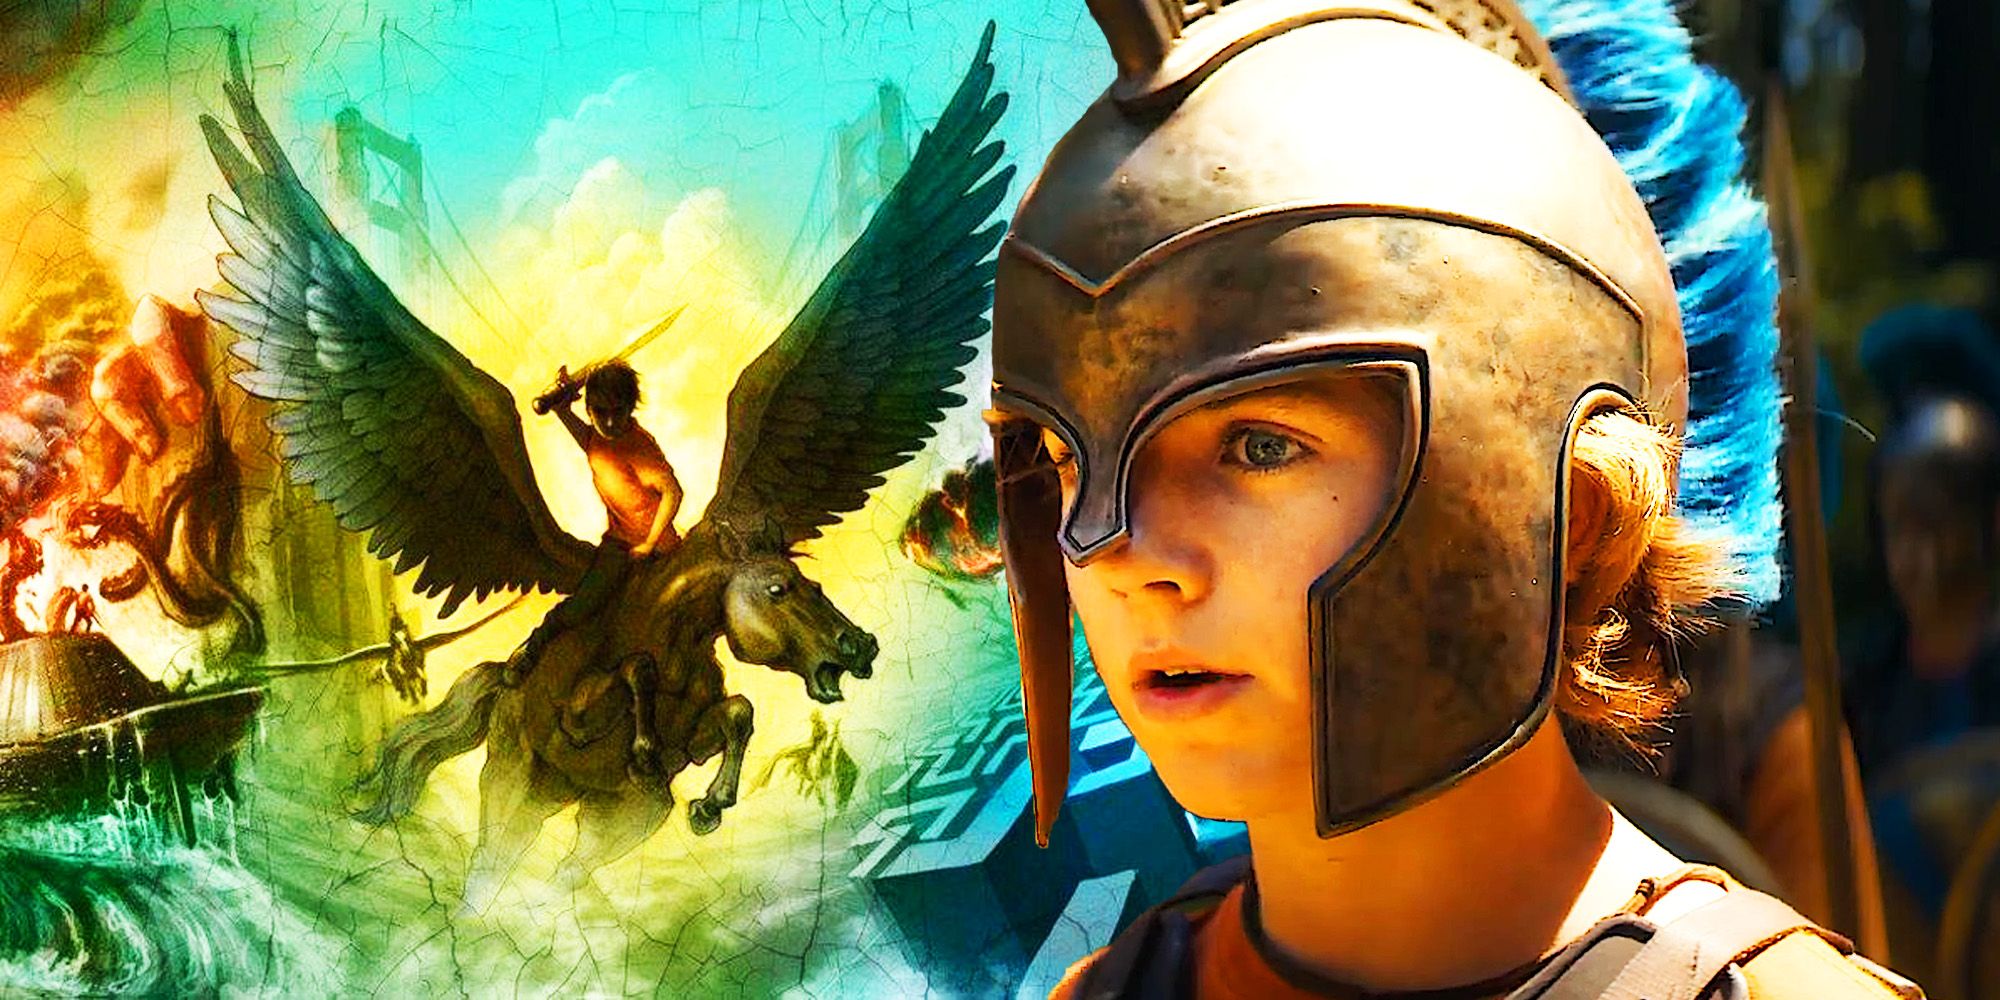 Percy Jackson & the Olympians book cover and Walker Scobell wearing a helmet as Percy Jackson in the Disney+ show